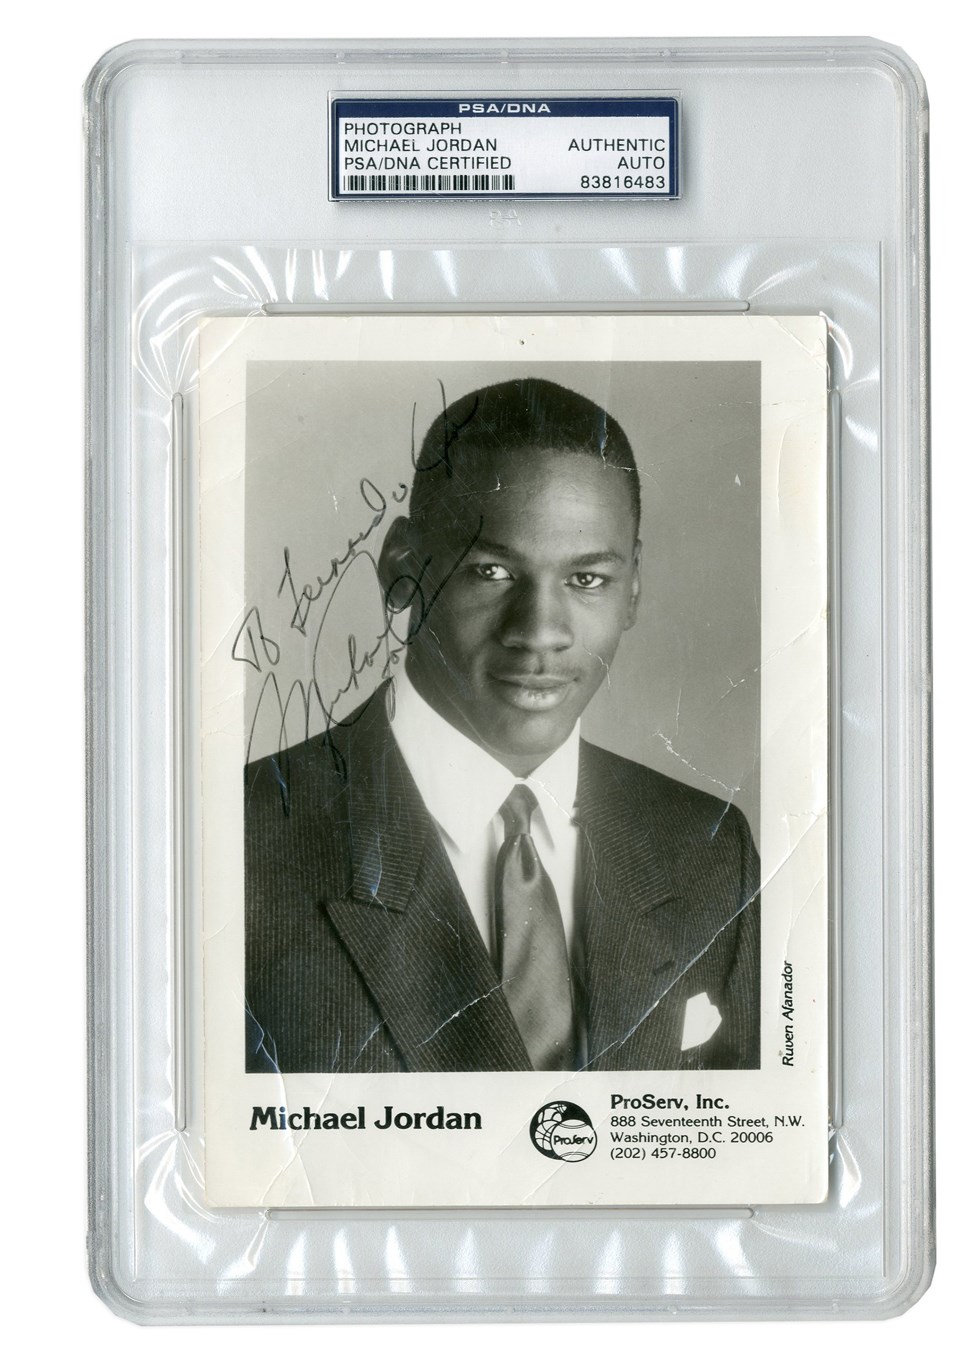 Basketball - 1985 Michael Jordan Signed Promotional Photo from One and Only Public Signing (PSA/DNA)